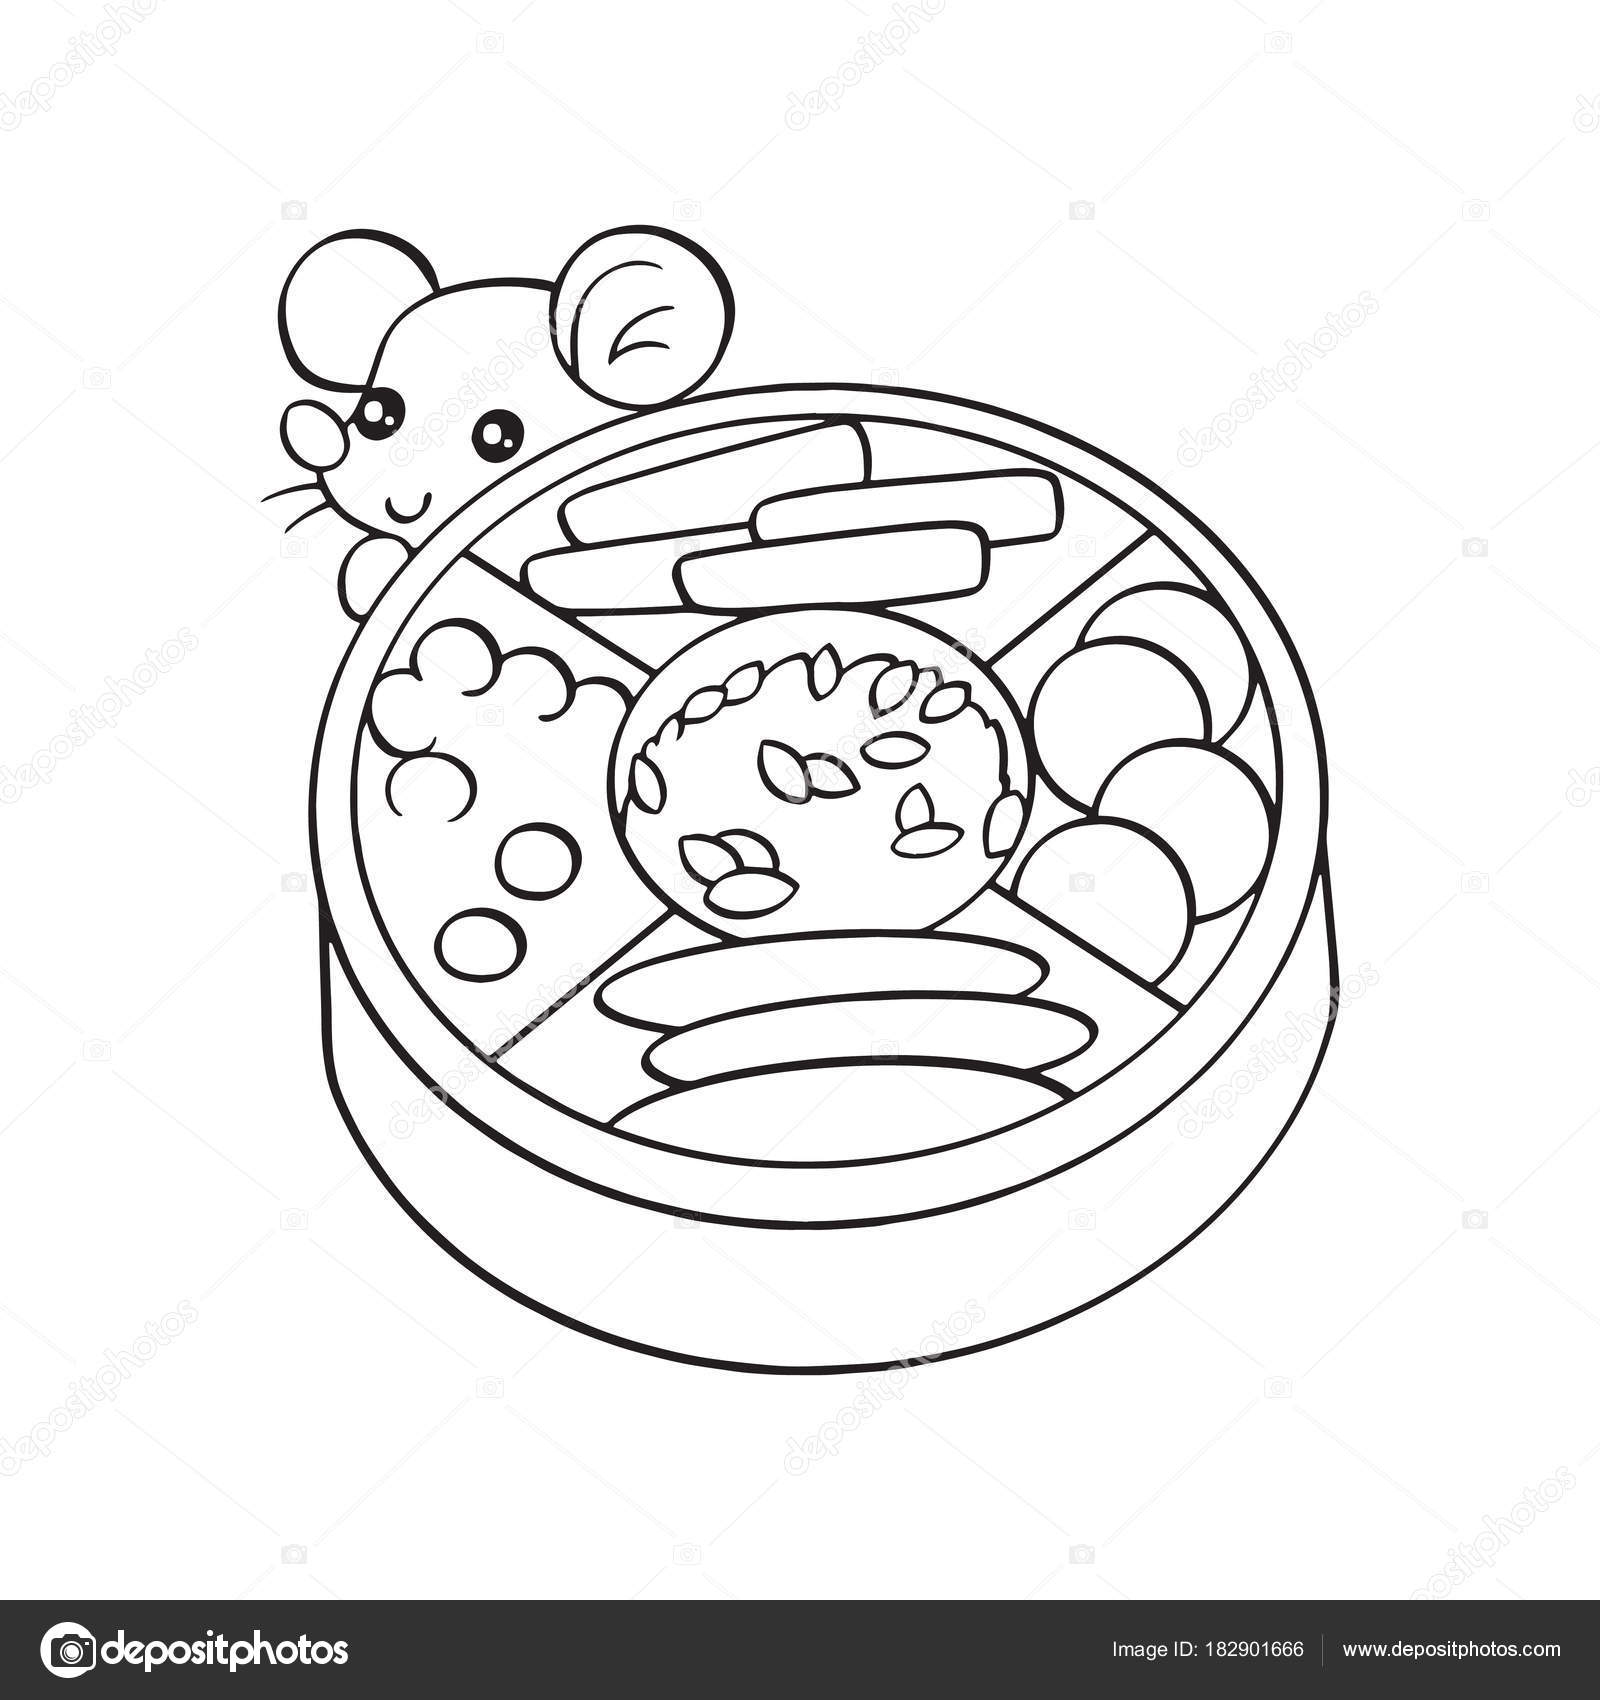 Featured image of post Easy Cute Food Drawings Black And White - We hope you enjoy our growing collection of hd images to use as a.